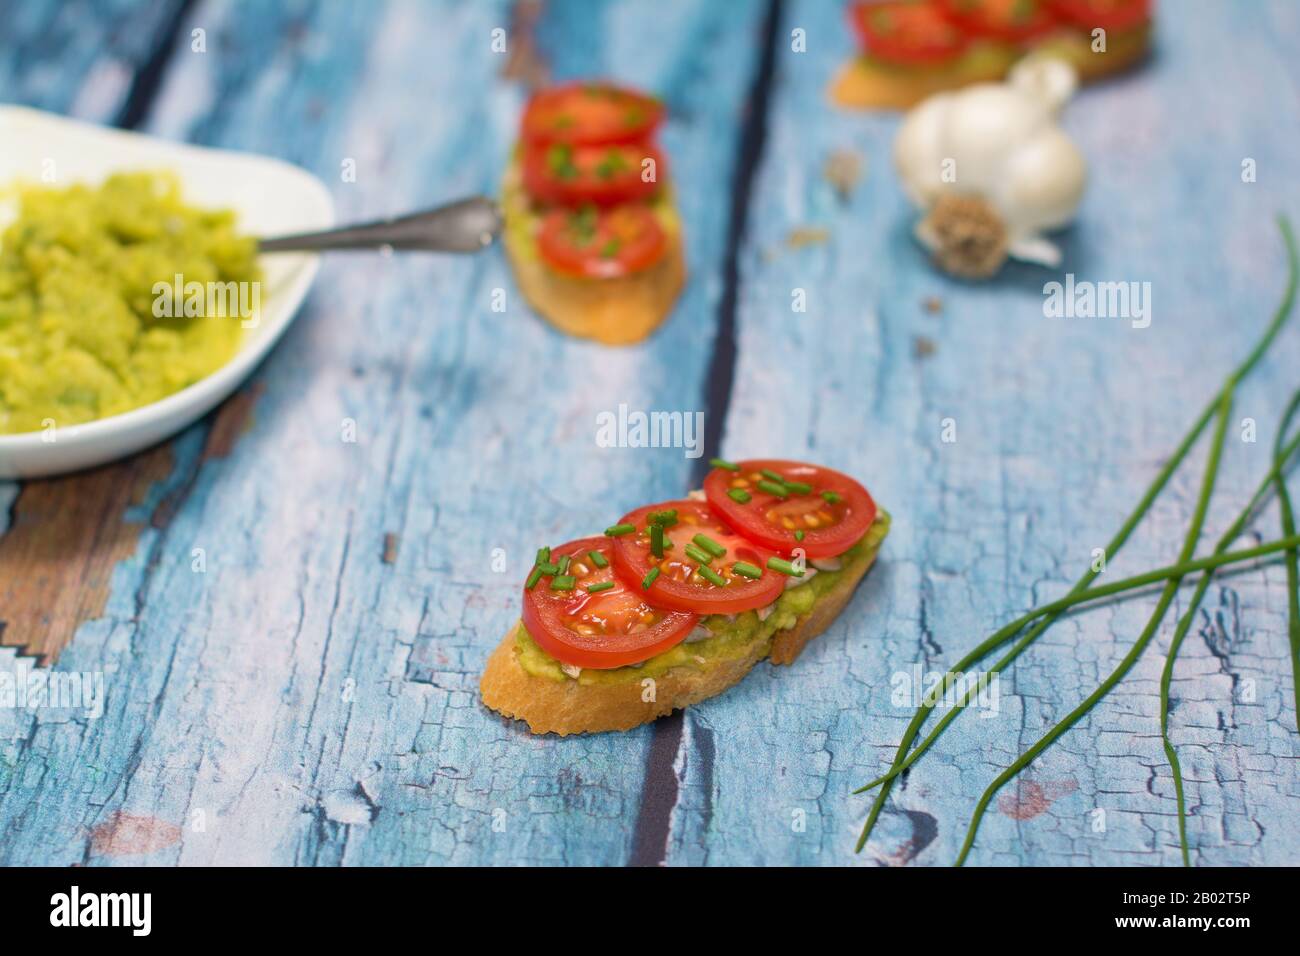 Open sandwich and a few chives scapes... two sandwiches, a bowl with avocado spread, and a garlic bulb are visible in a blurry background. Stock Photo